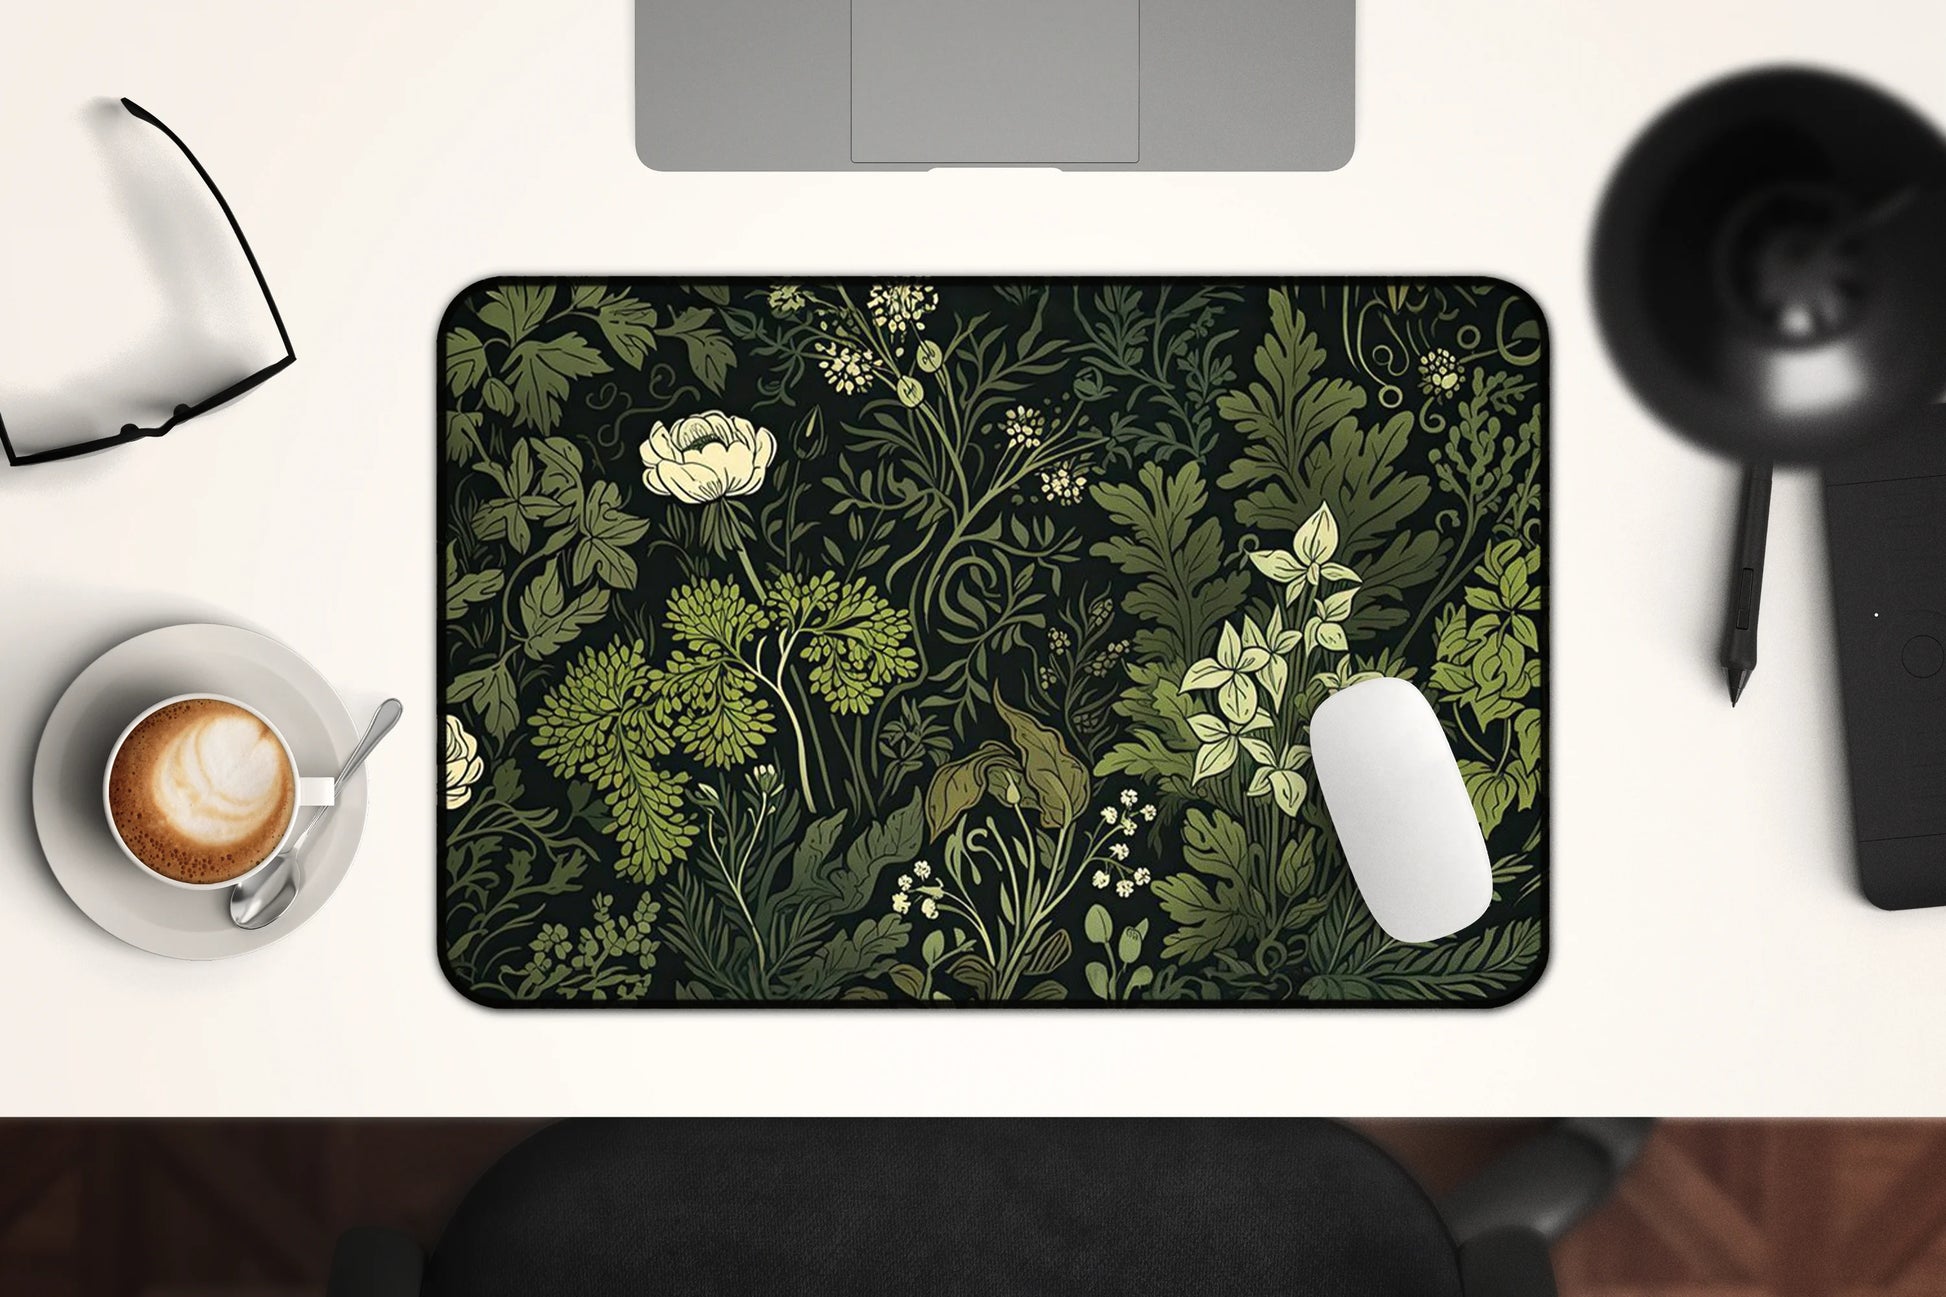 Overhead view of a desk setup featuring a dark green floral-themed desk mat with botanical illustrations. Includes a monitor, keyboard, mouse, coffee cup, and glasses on a white desk surface.